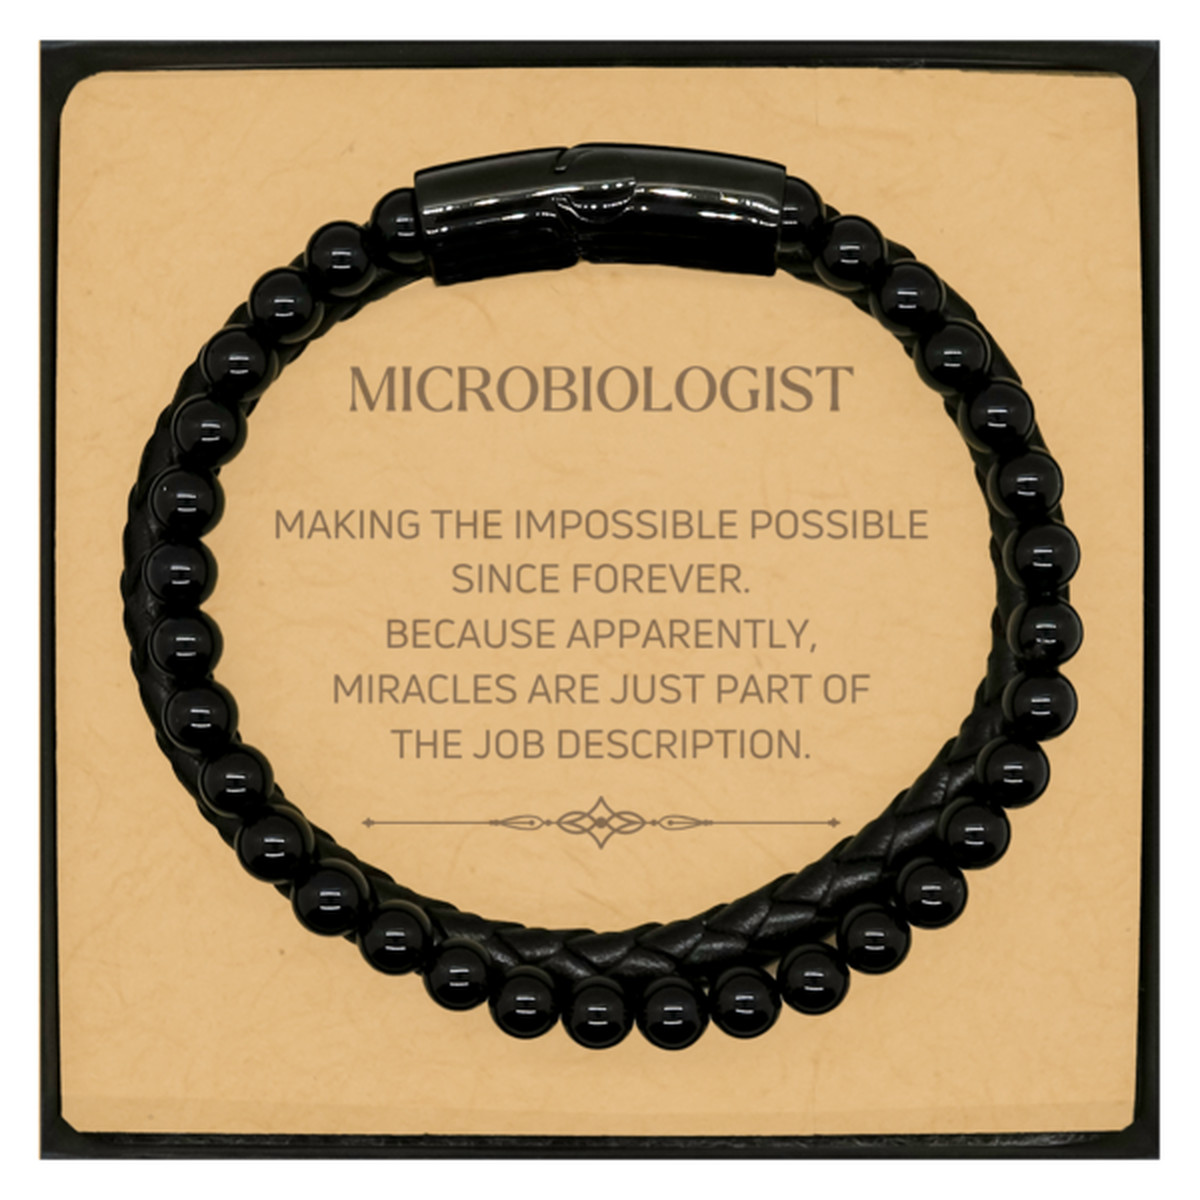 Funny Microbiologist Gifts, Miracles are just part of the job description, Inspirational Birthday Christmas Stone Leather Bracelets For Microbiologist, Men, Women, Coworkers, Friends, Boss